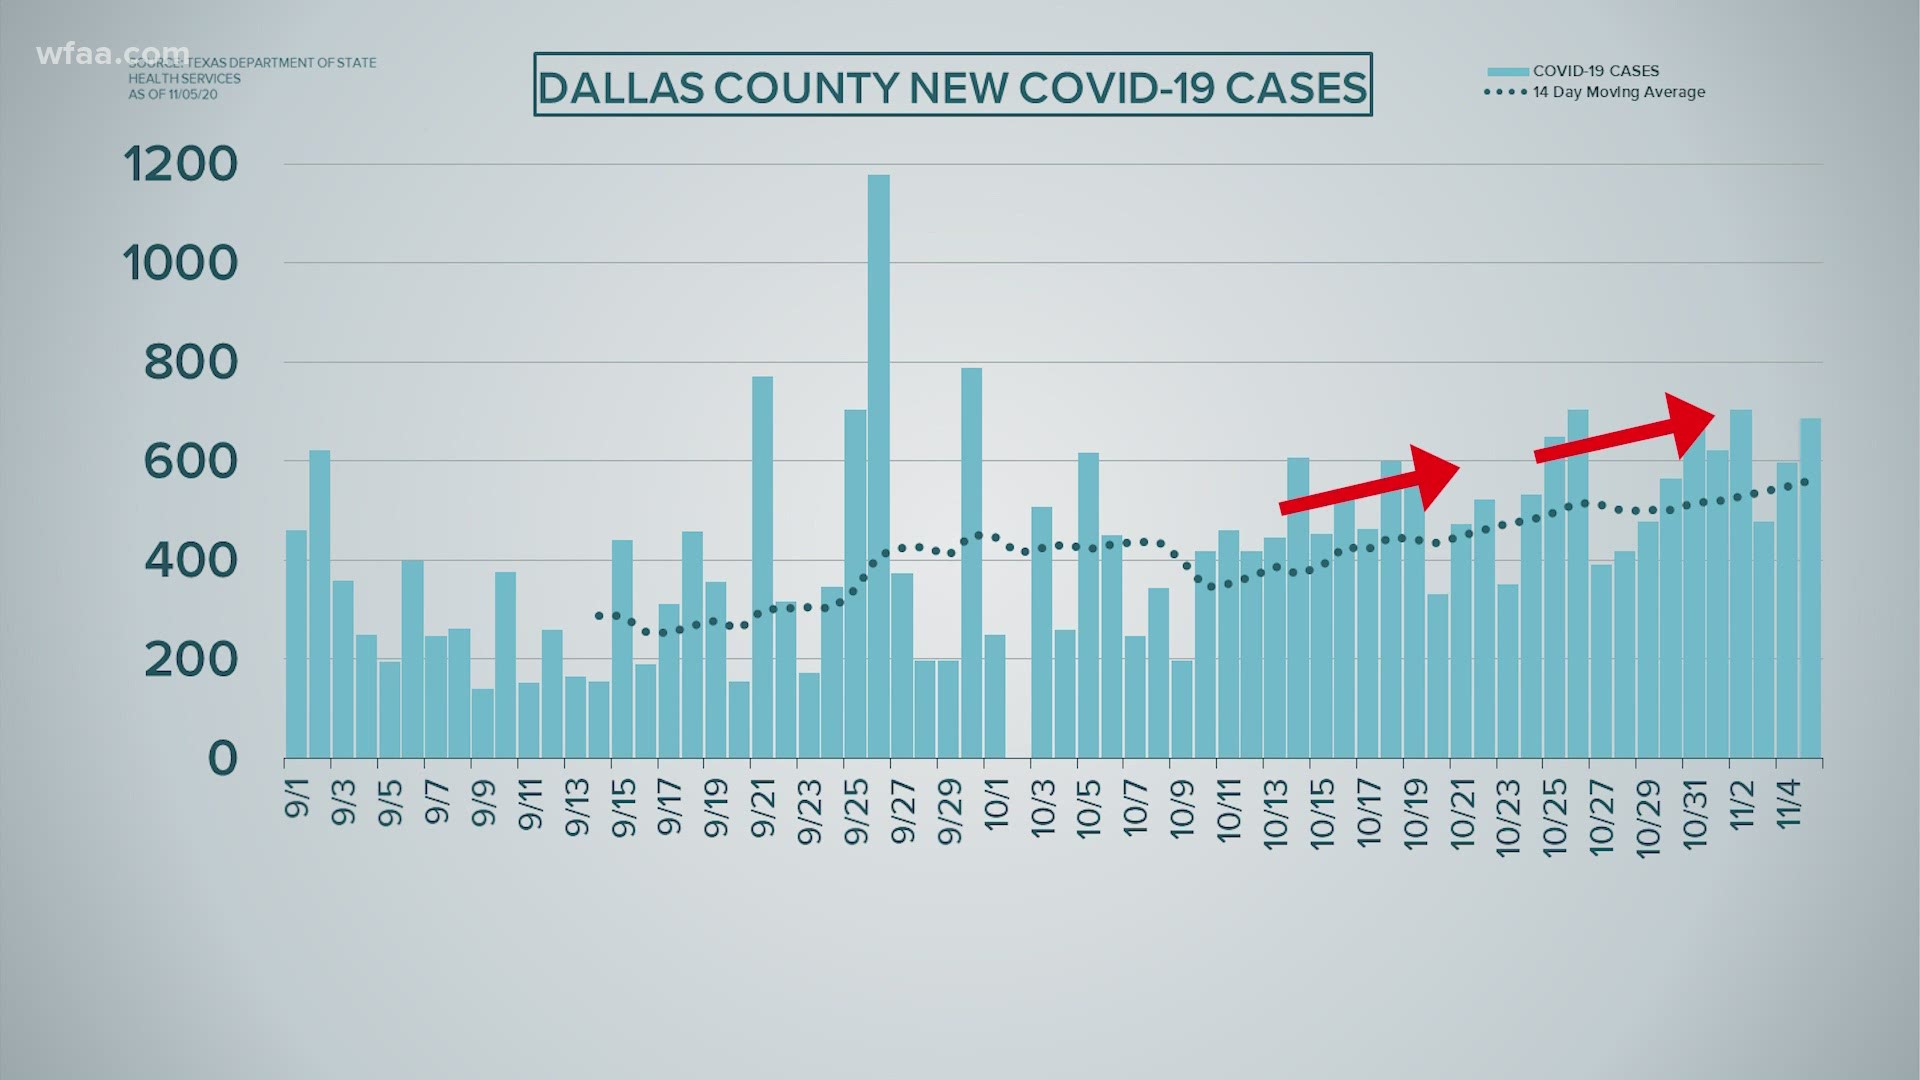 The state of Texas reported more than 8,000 COVID-19 cases and 133 deaths Thursday, Nov. 5.